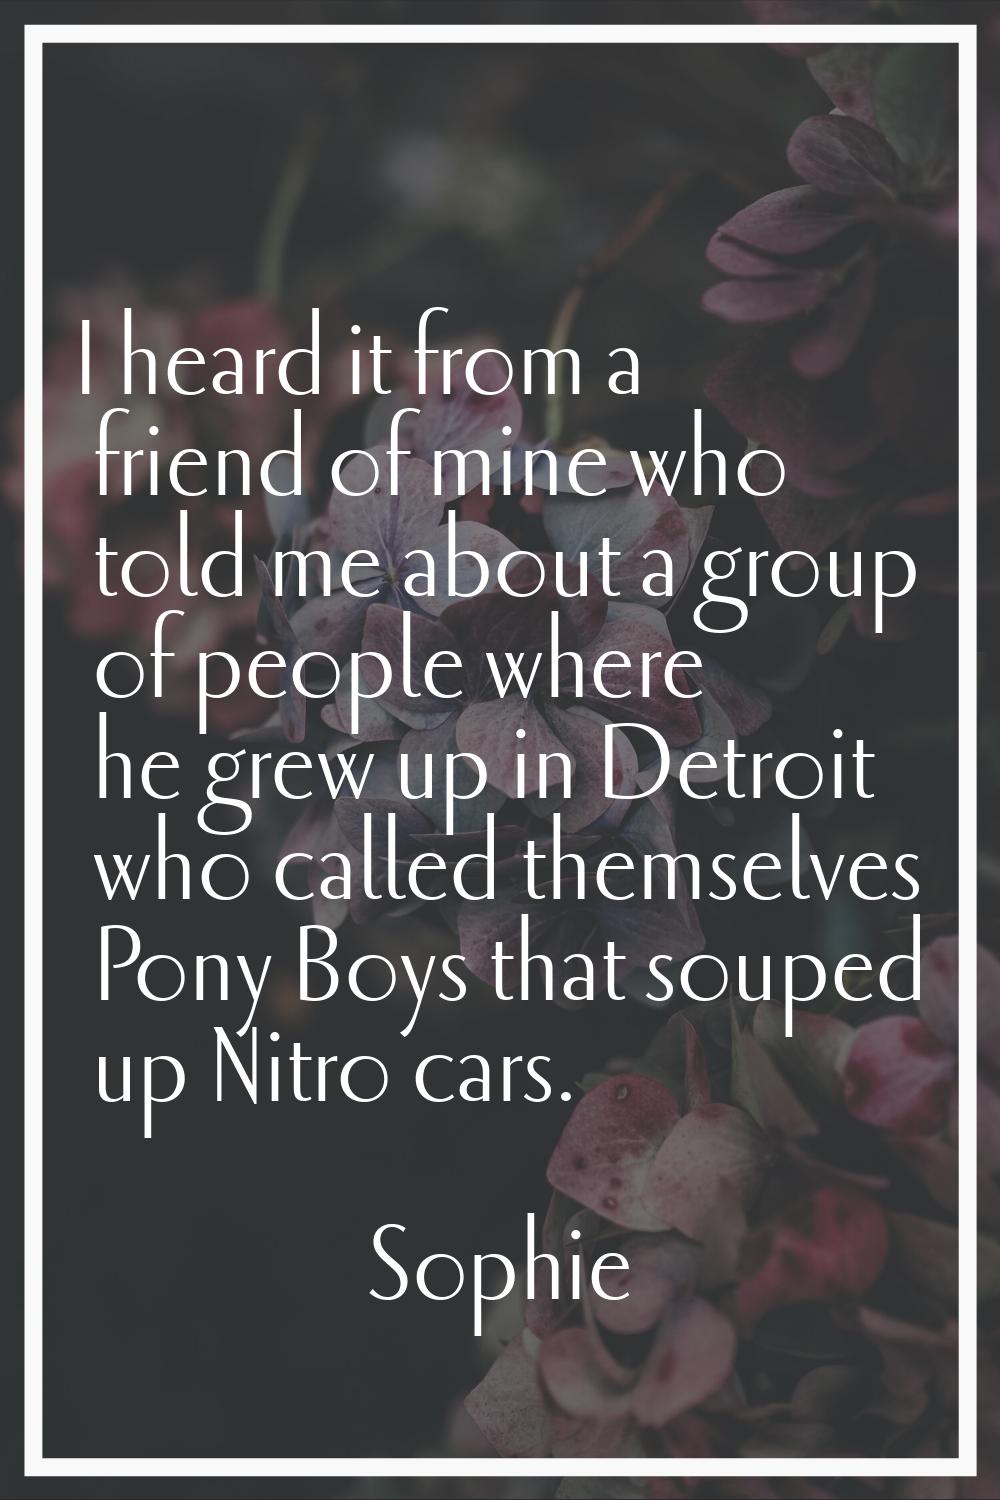 I heard it from a friend of mine who told me about a group of people where he grew up in Detroit wh